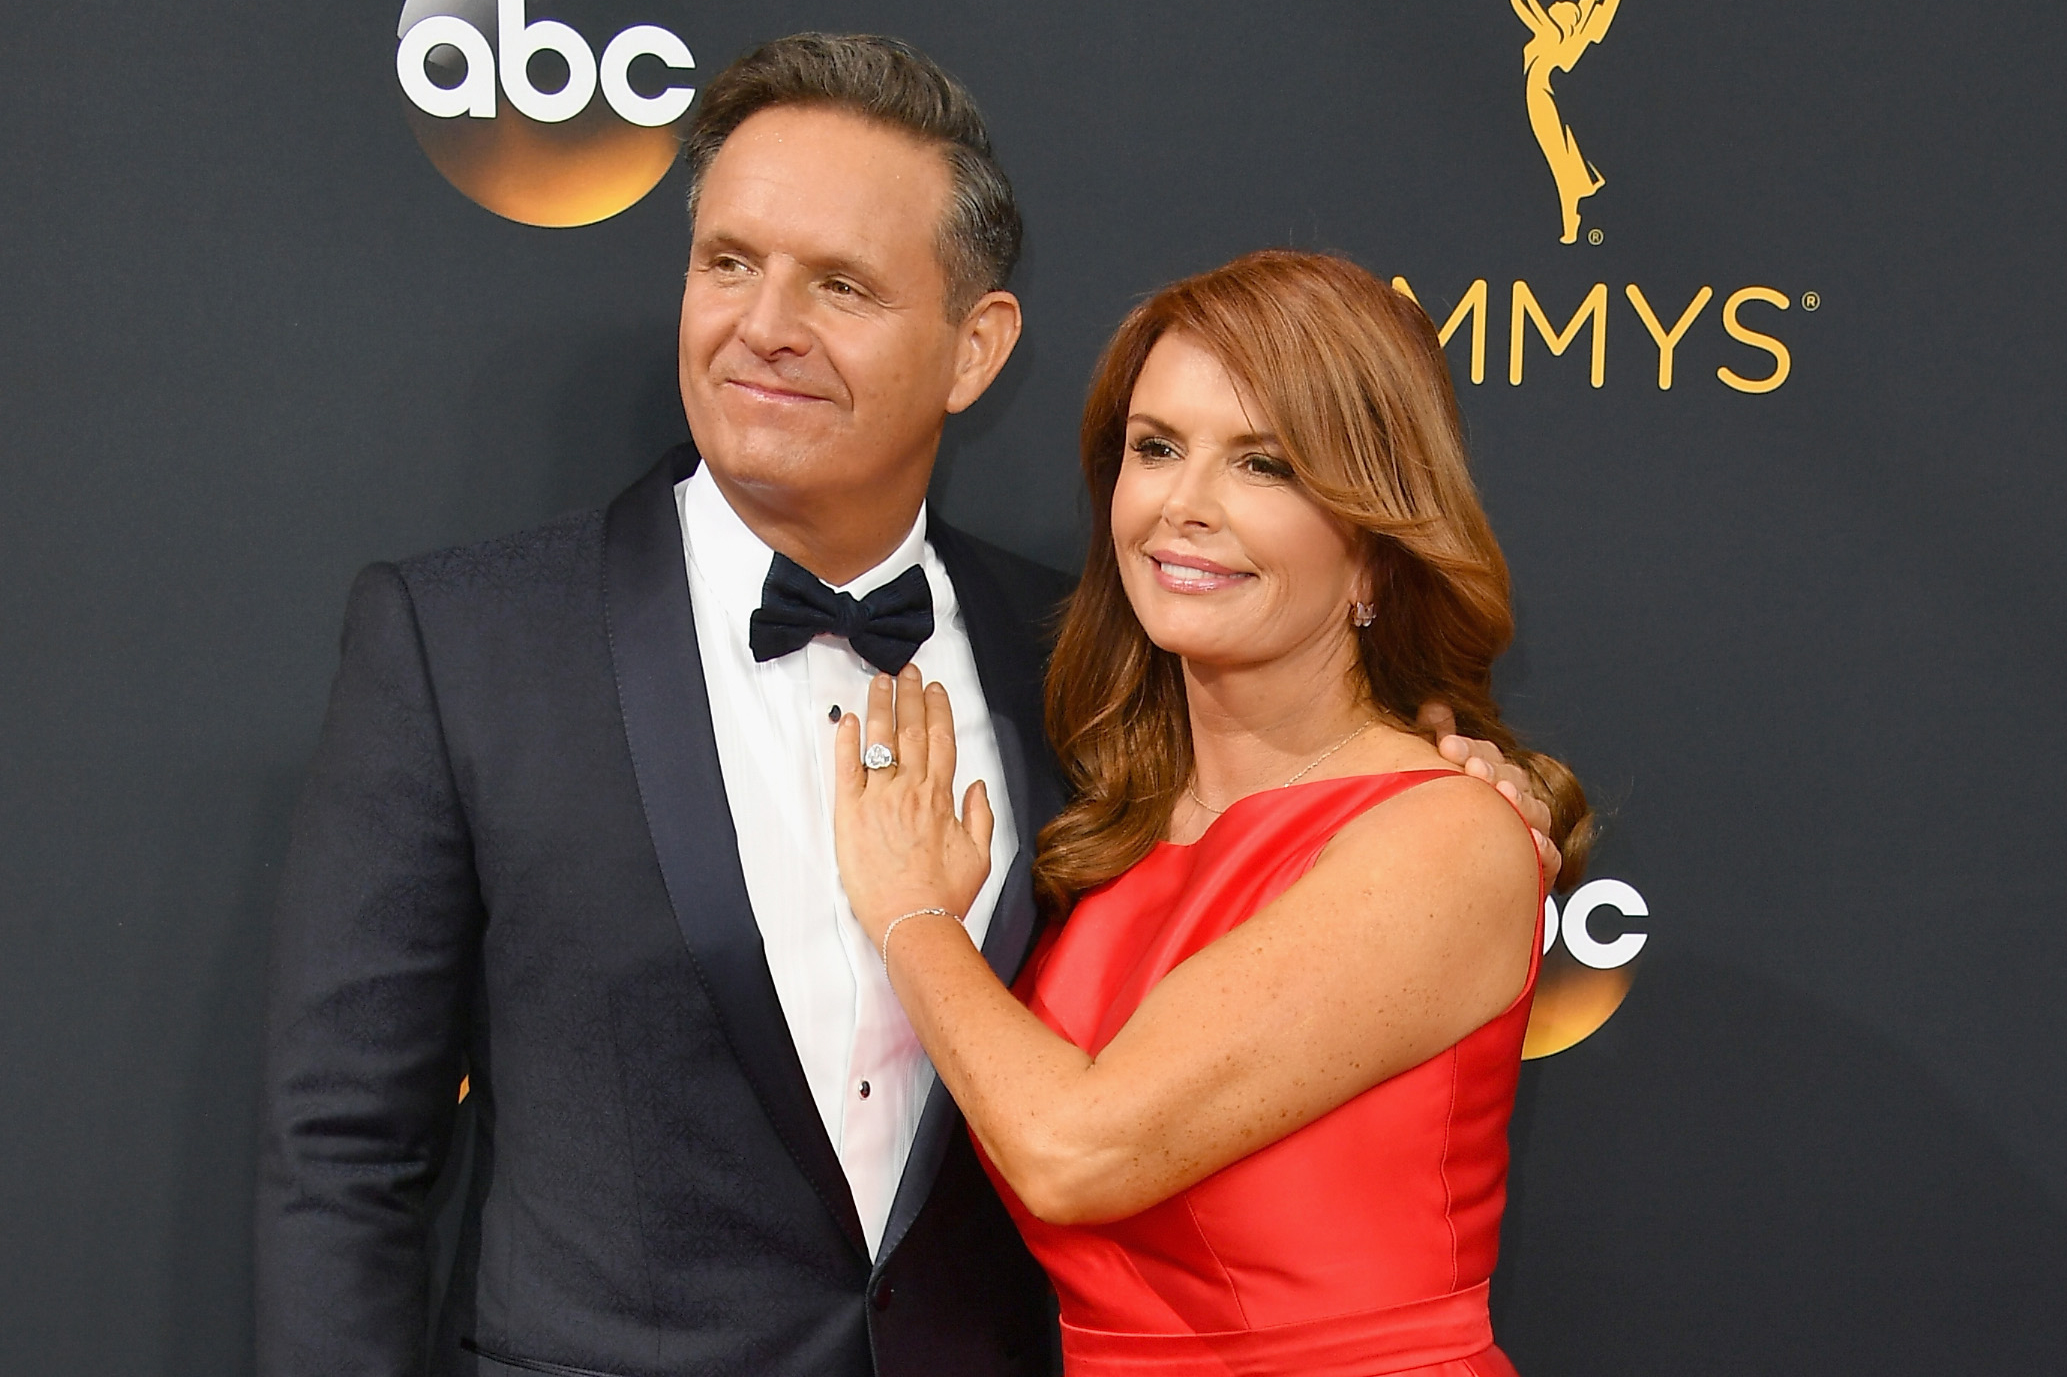 Mark Burnett and Roma Downey attend the 68th Annual Primetime Emmy Awards at Microsoft Theater on Sept. 18, 2016 in Los Angeles. (Steve Granitz—Getty Images)